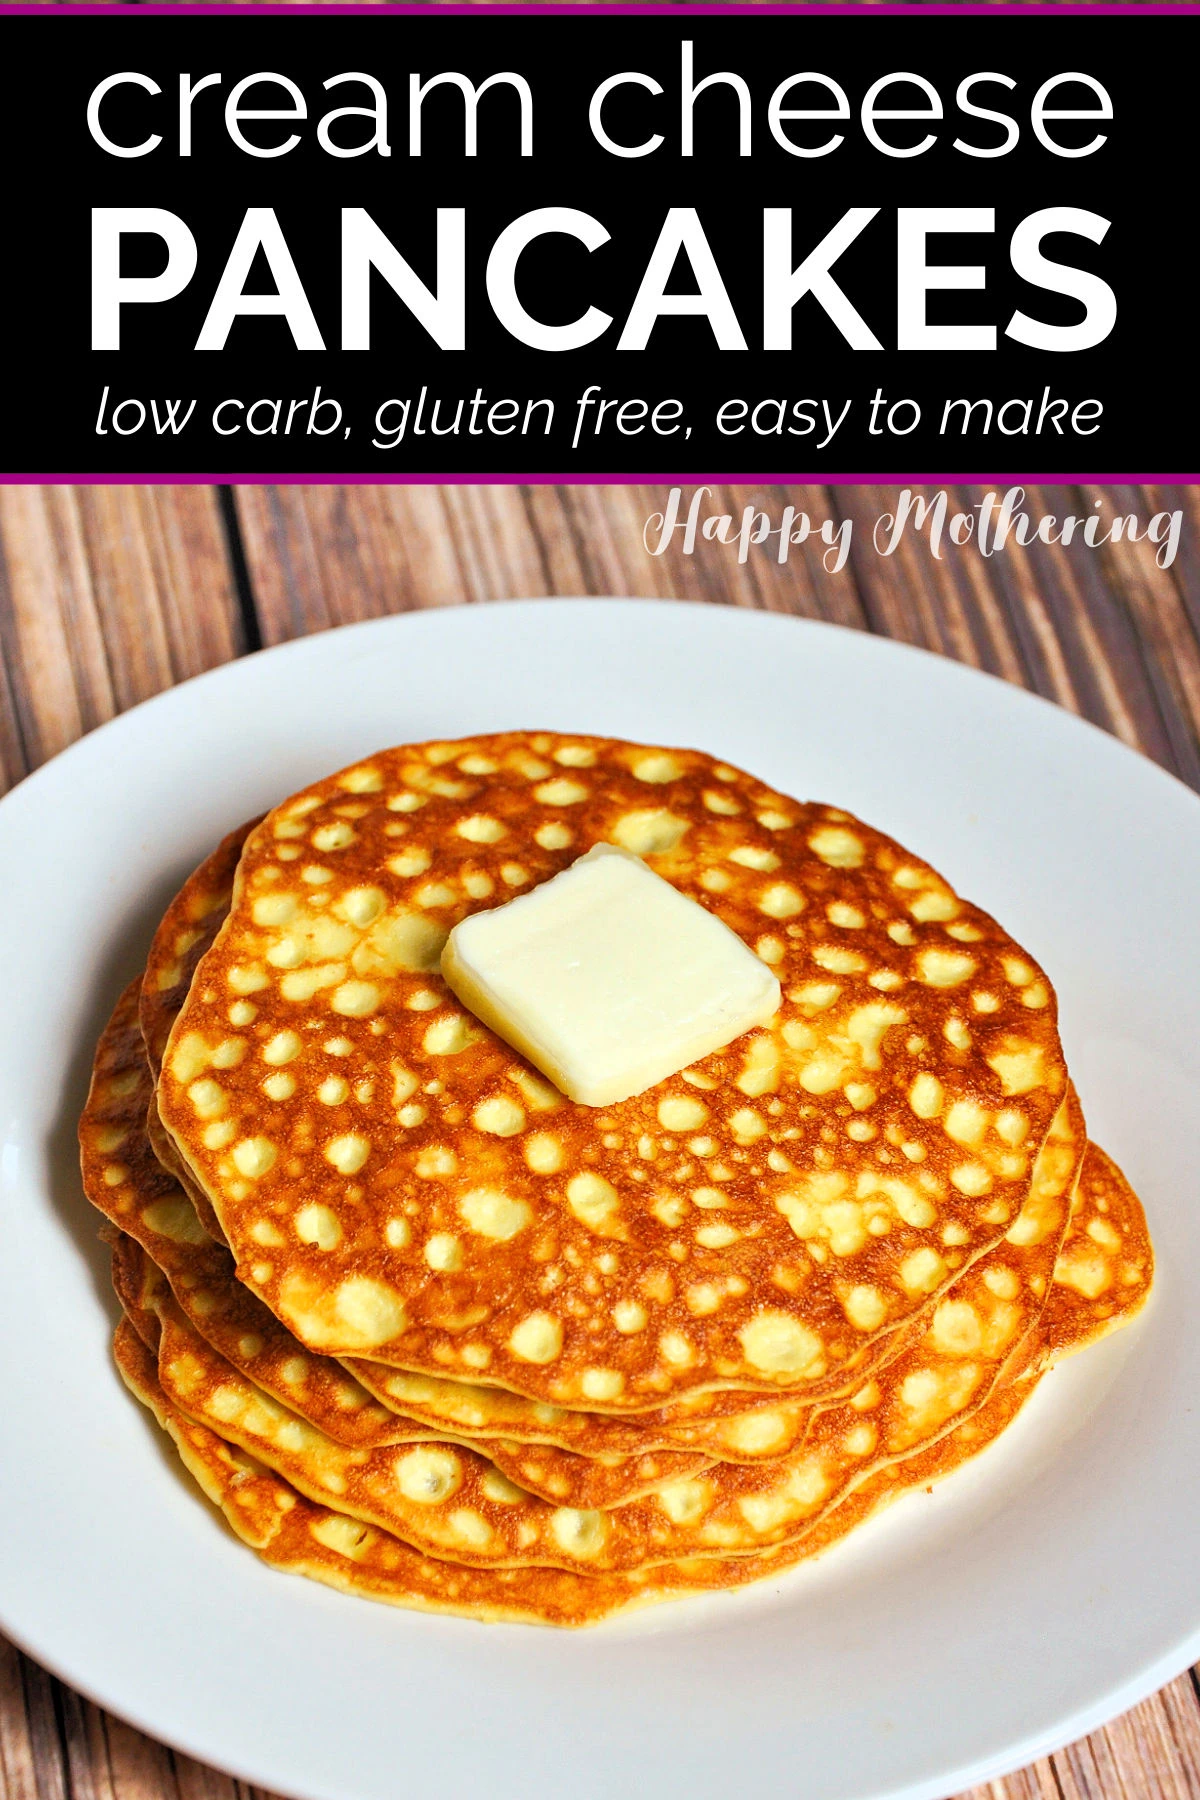 Are you trying a low carb or ketogenic diet to lose weight or improve your health? These low carb pancakes are super easy to make and adhere to a keto diet.